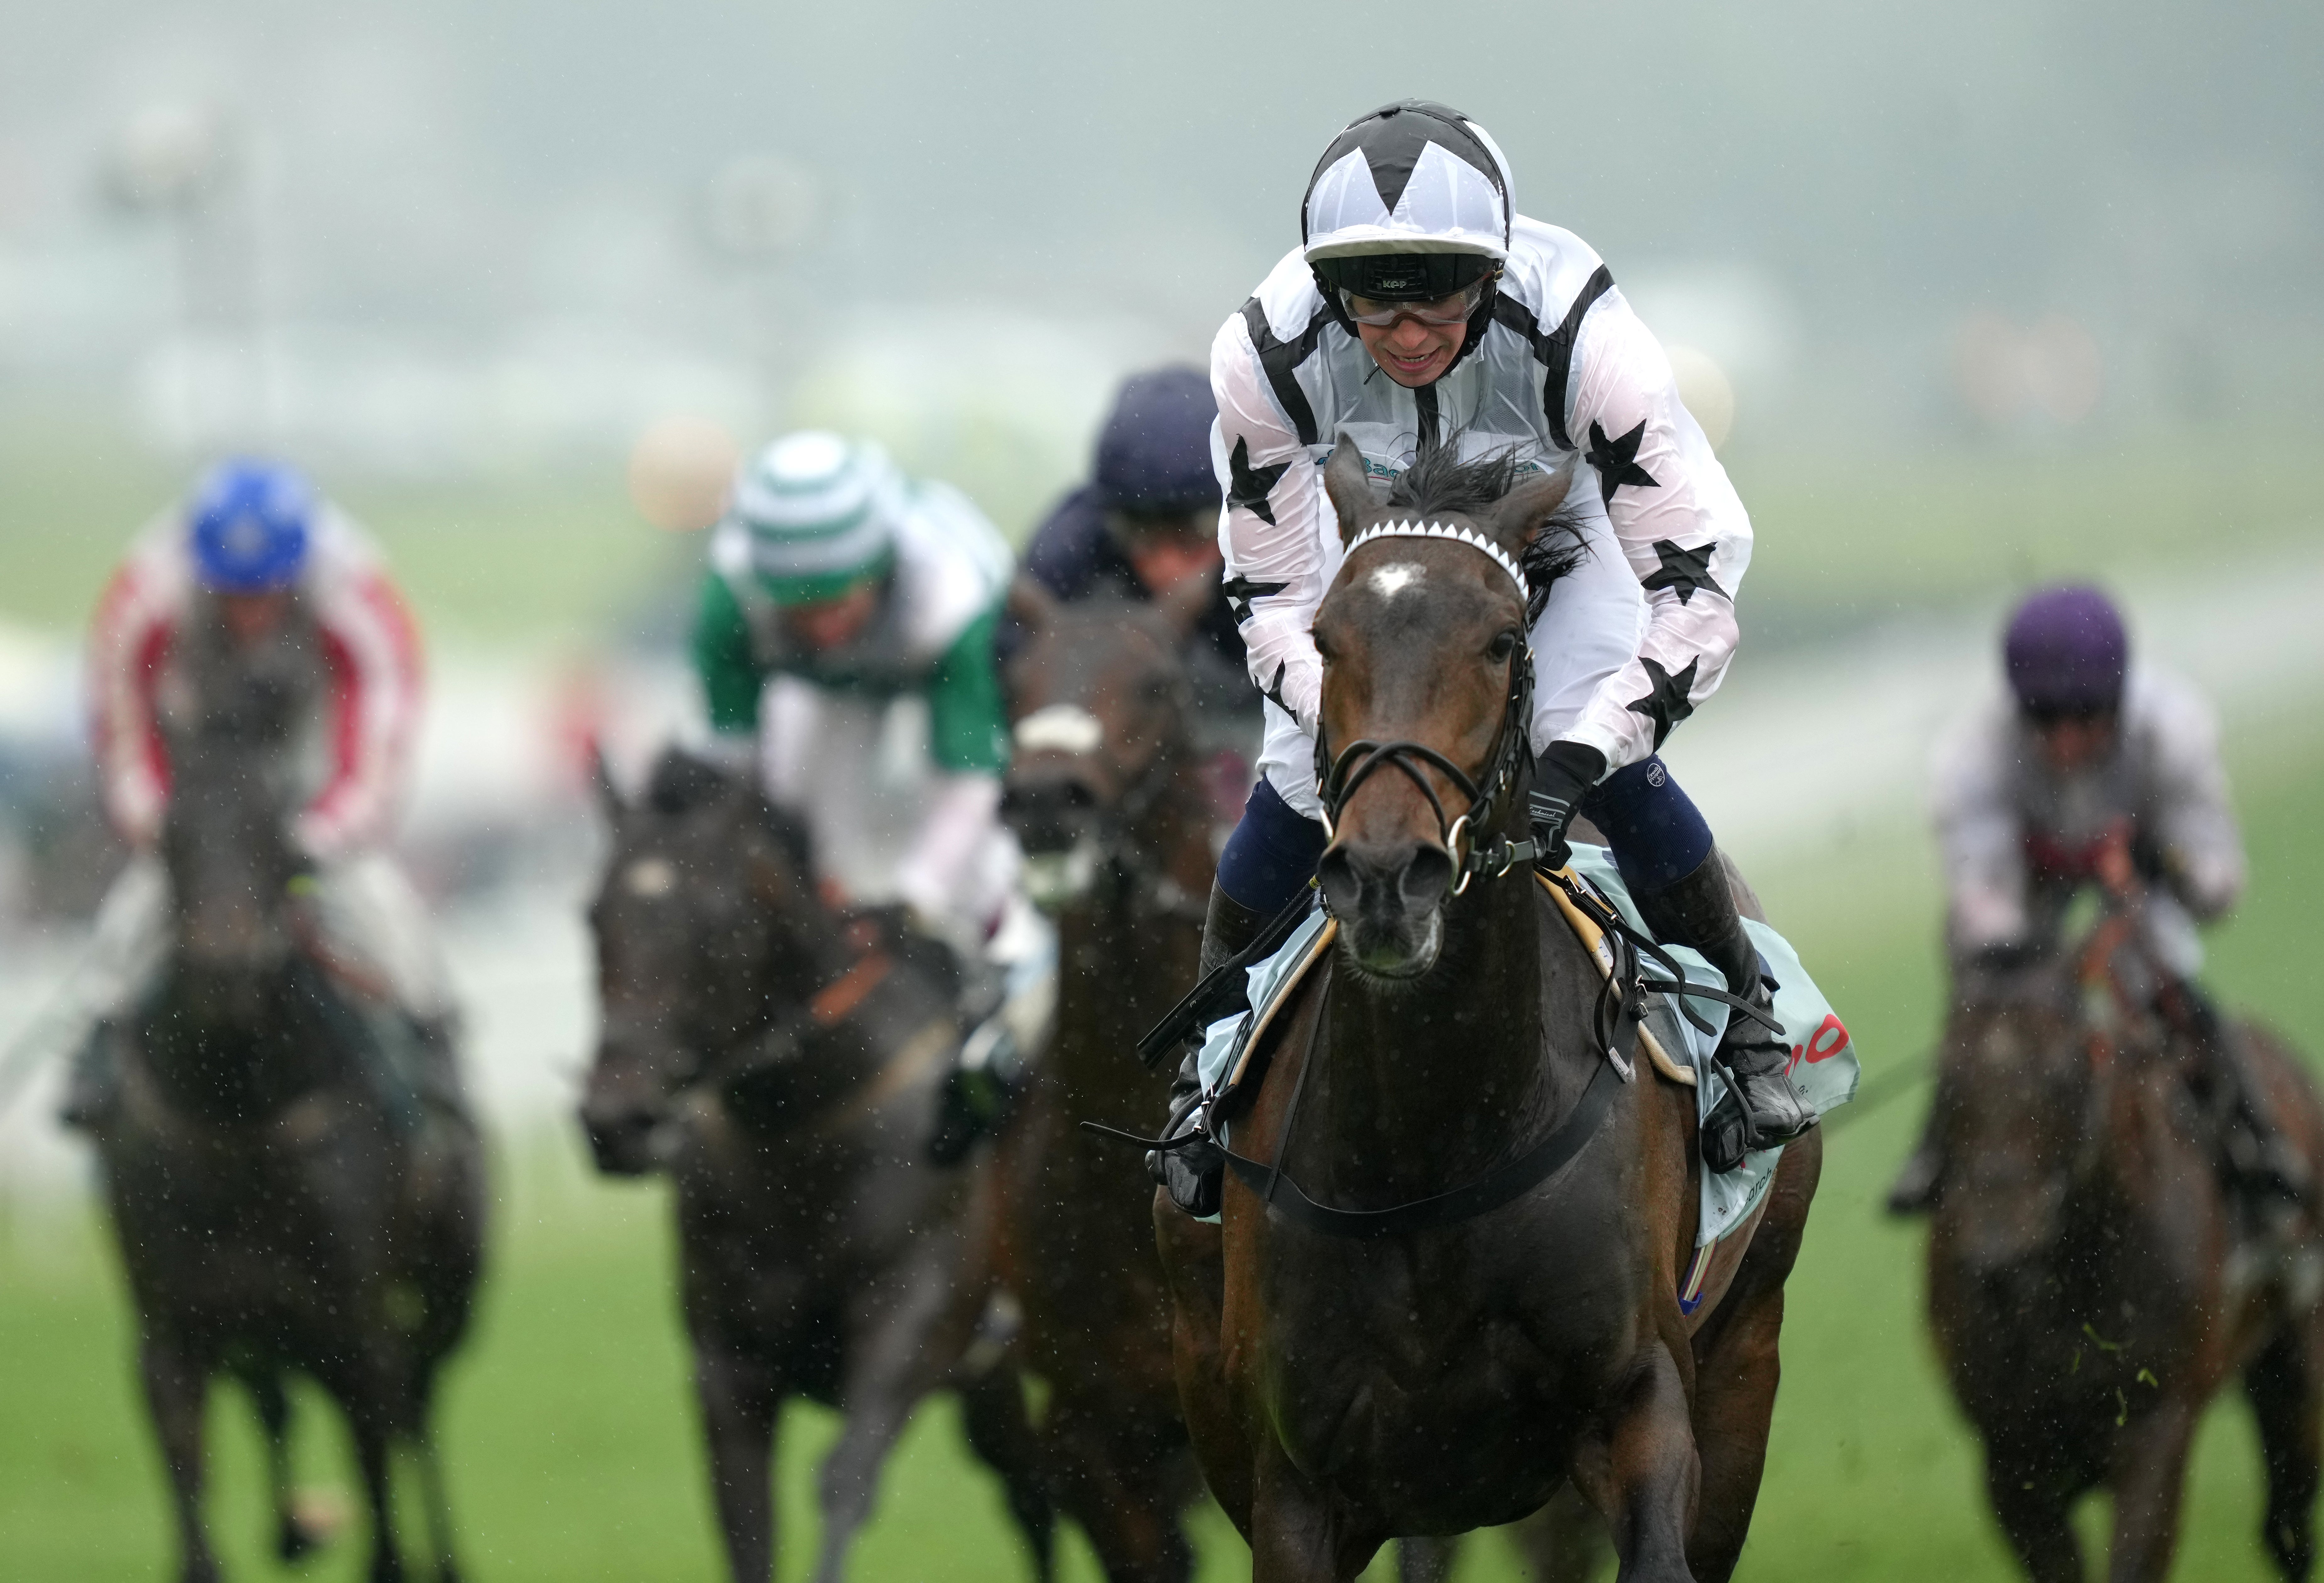 Oscula has options at Royal Ascot and Chantilly following her victory at Epsom